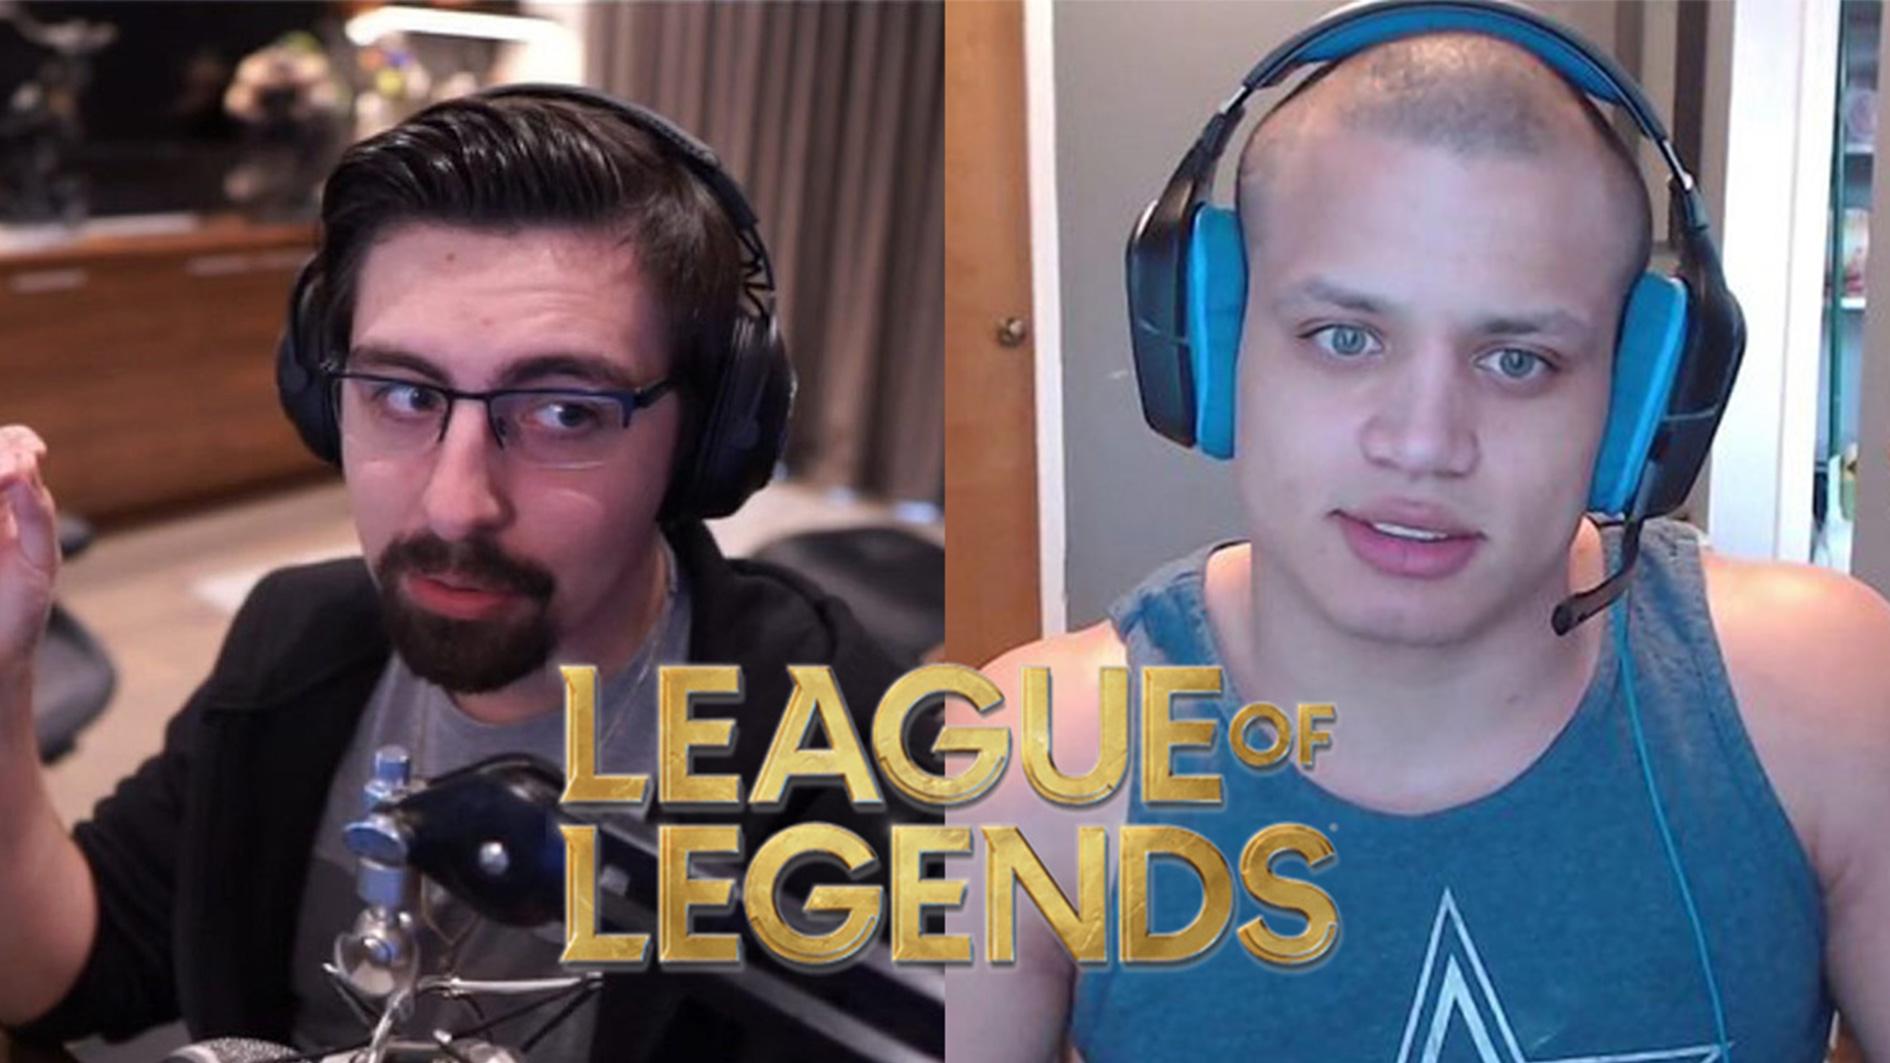 Support is so hard: Tyler1 reacts sarcastically after reaching grandmaster  in League of Legends in two weeks